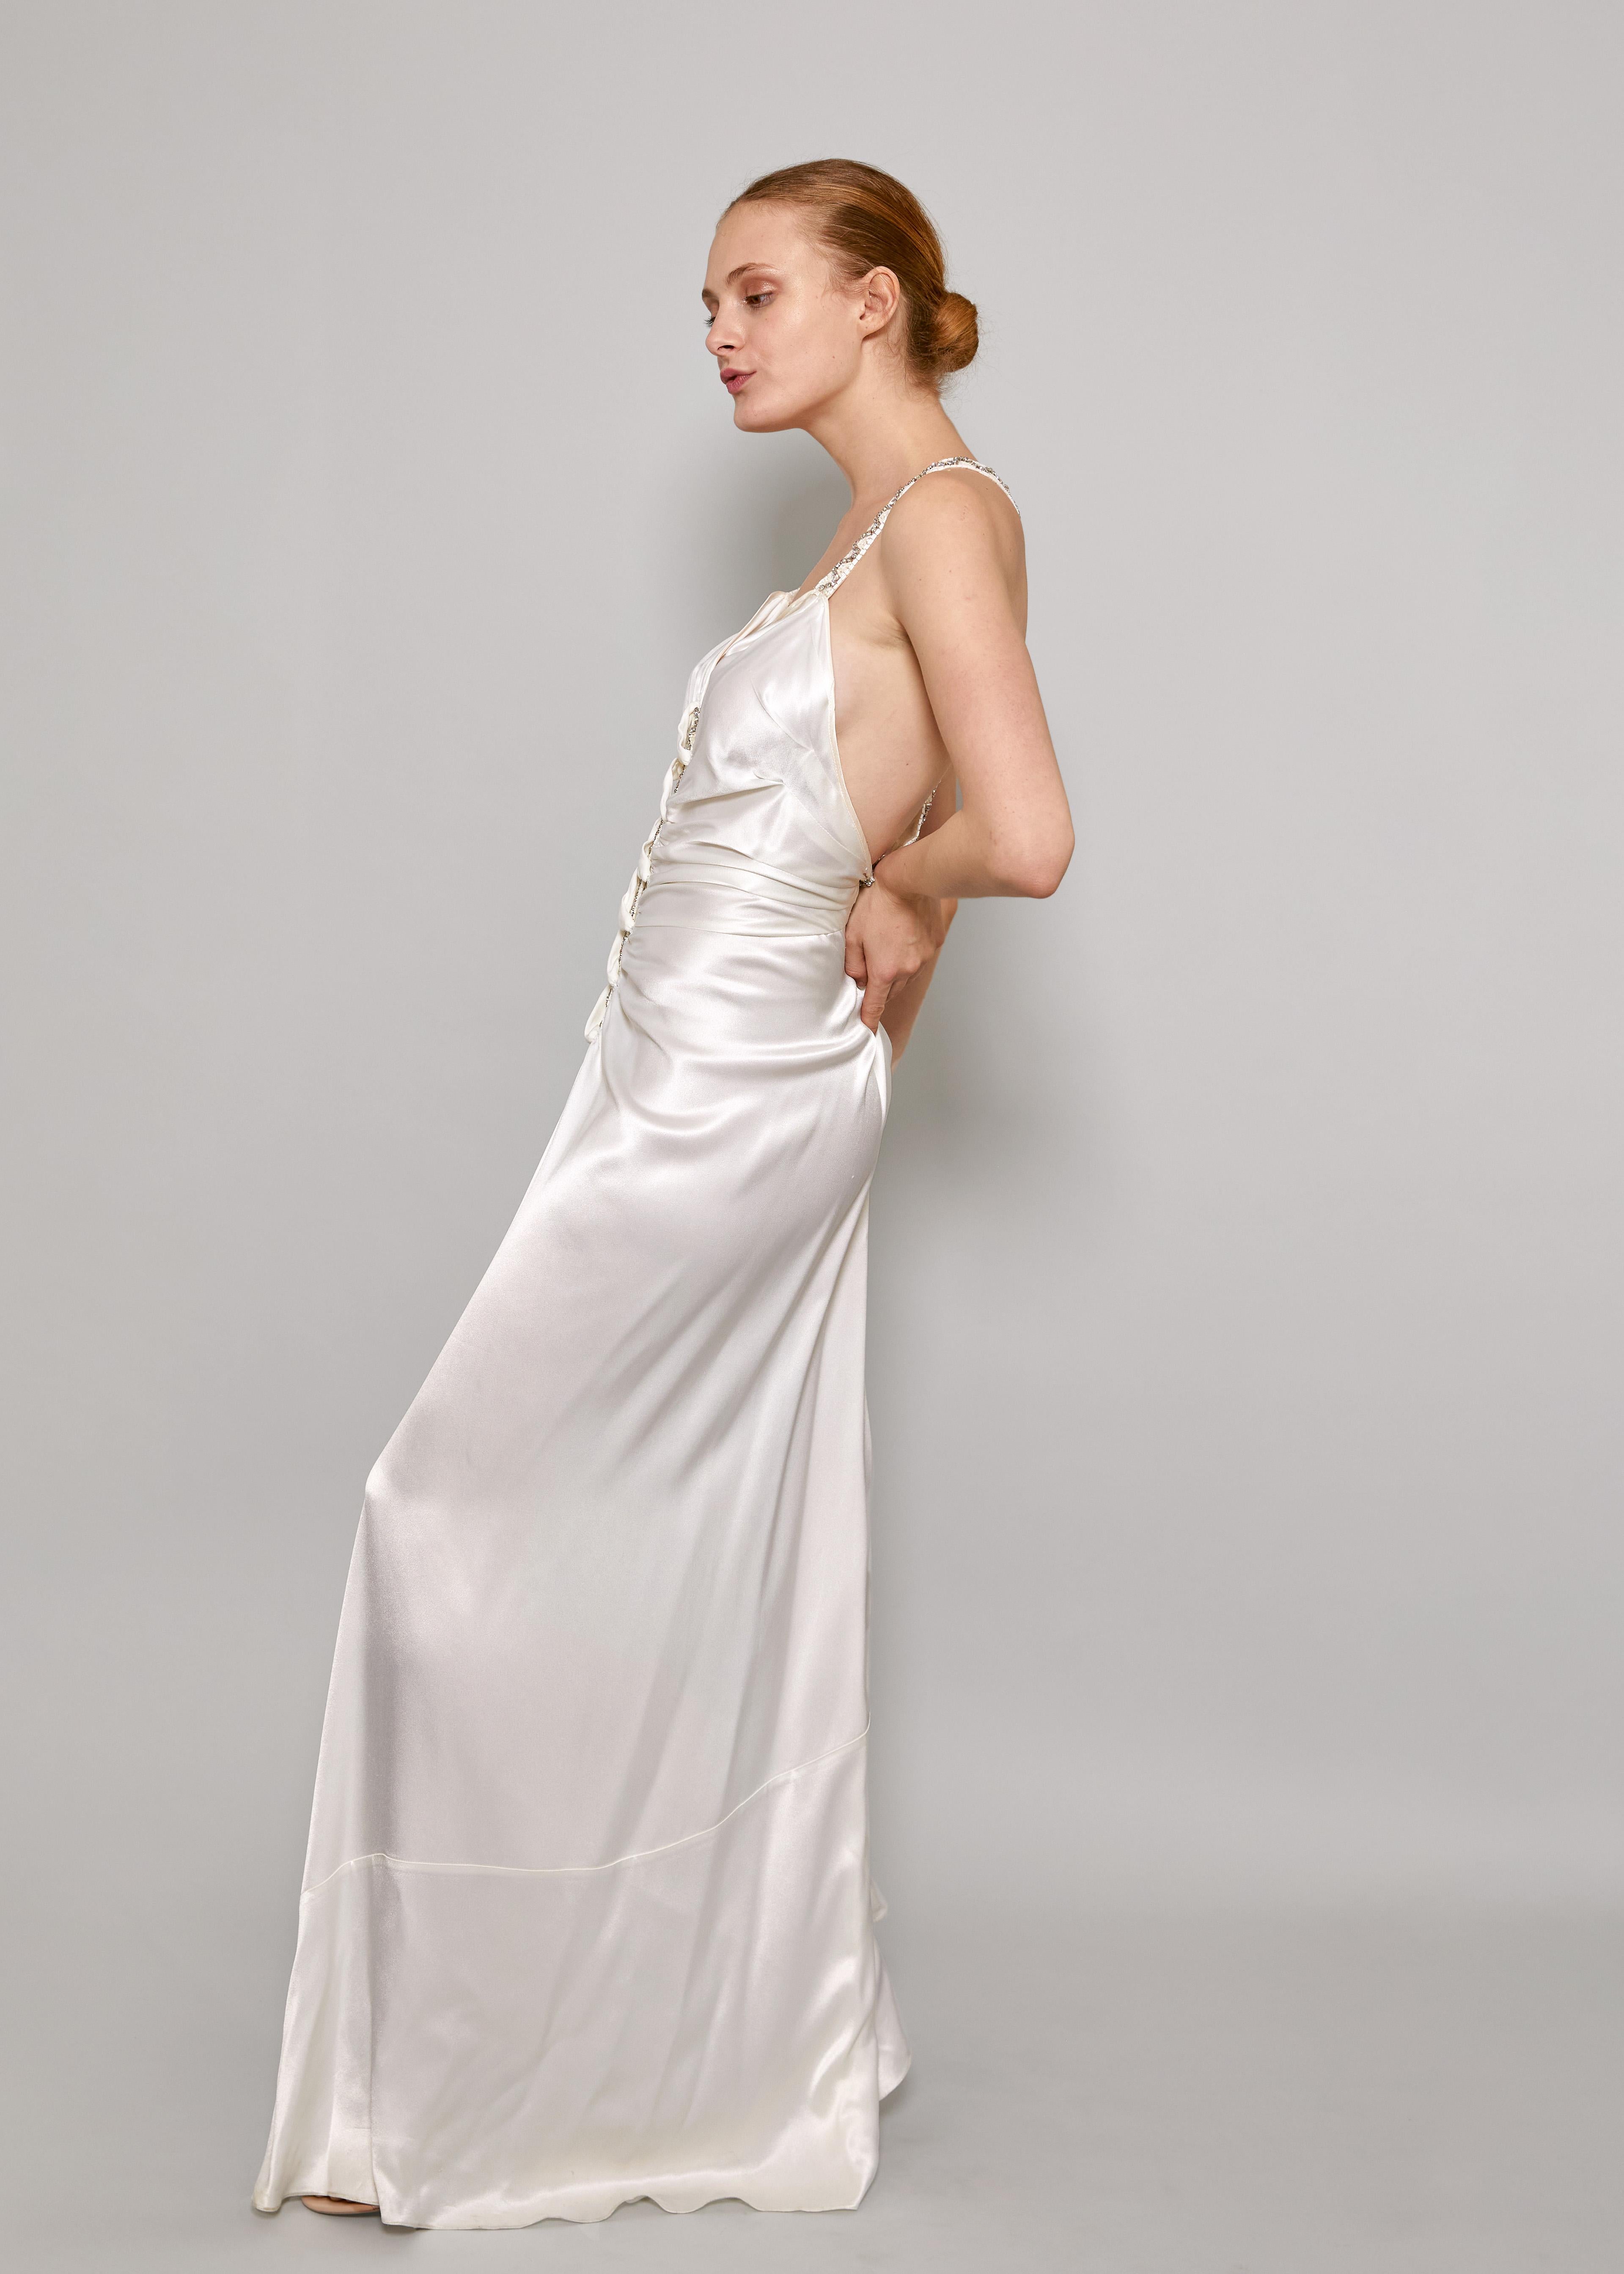 John Galliano S/S 2006 White Satin Bias Cut Dress In Good Condition For Sale In Los Angeles, CA